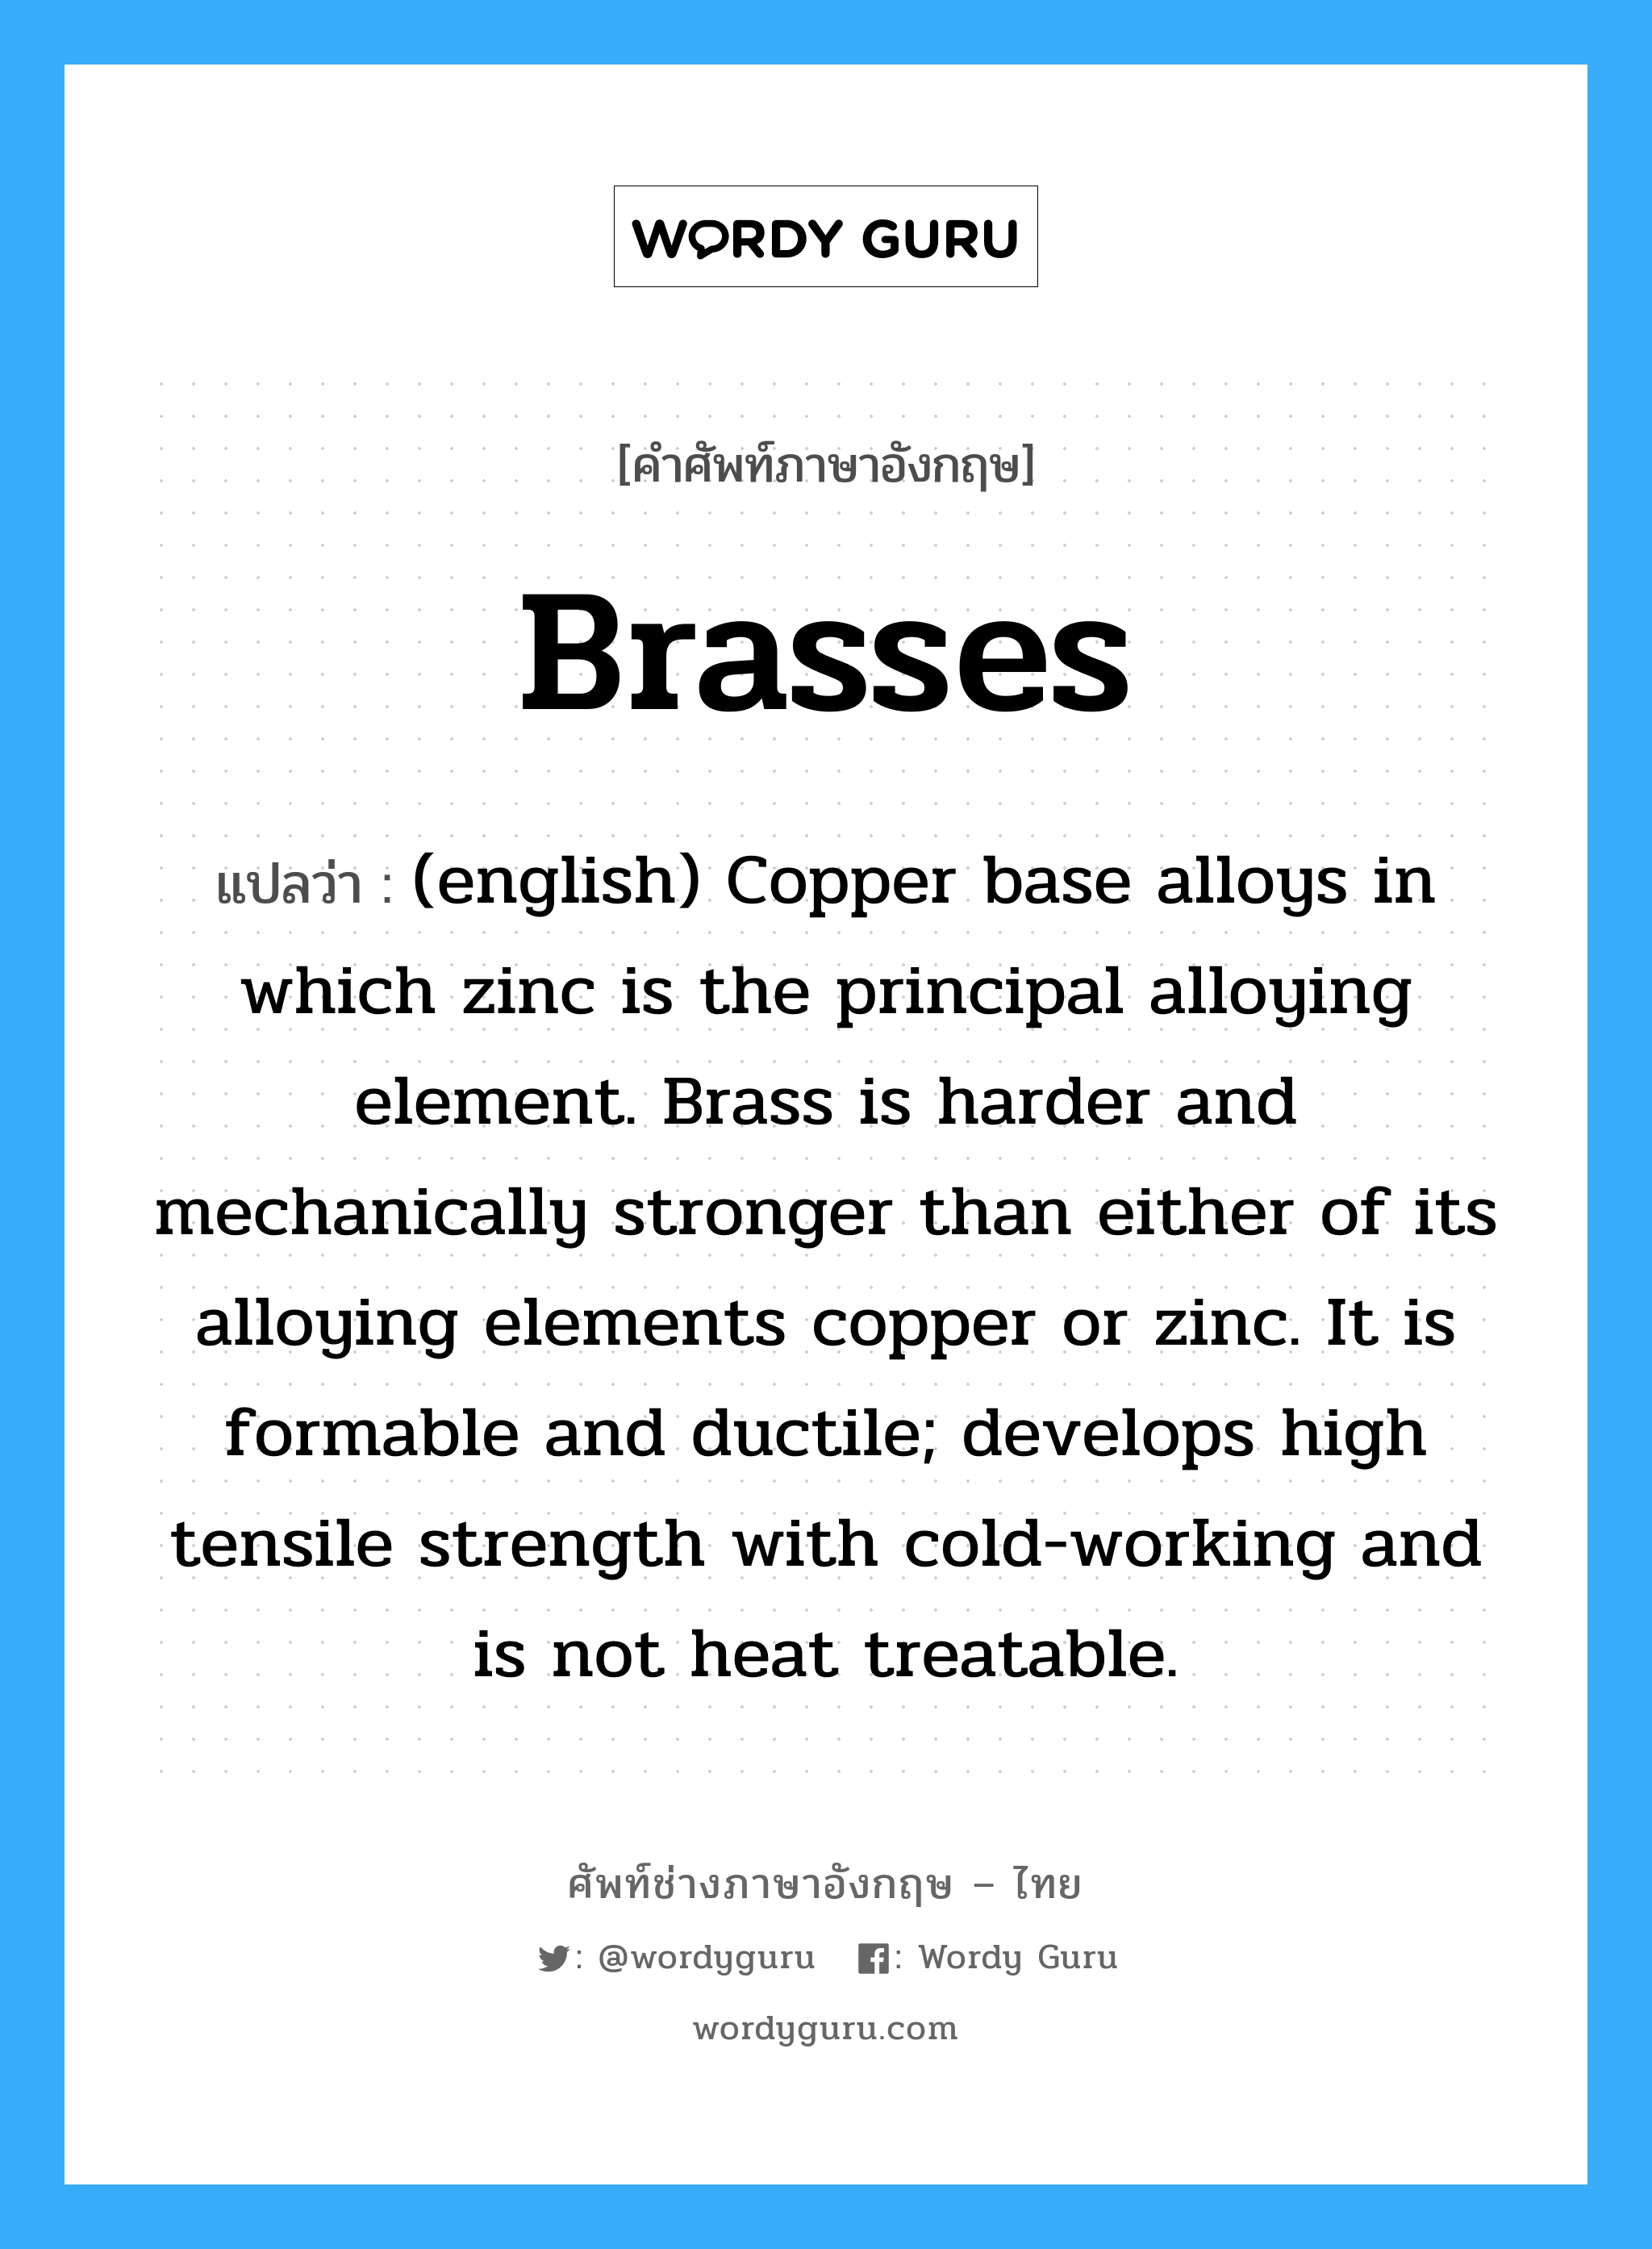 (english) Copper base alloys in which zinc is the principal alloying element. Brass is harder and mechanically stronger than either of its alloying elements copper or zinc. It is formable and ductile; develops high tensile strength with cold-working and is not heat treatable. ภาษาอังกฤษ?, คำศัพท์ช่างภาษาอังกฤษ - ไทย (english) Copper base alloys in which zinc is the principal alloying element. Brass is harder and mechanically stronger than either of its alloying elements copper or zinc. It is formable and ductile; develops high tensile strength with cold-working and is not heat treatable. คำศัพท์ภาษาอังกฤษ (english) Copper base alloys in which zinc is the principal alloying element. Brass is harder and mechanically stronger than either of its alloying elements copper or zinc. It is formable and ductile; develops high tensile strength with cold-working and is not heat treatable. แปลว่า Brasses